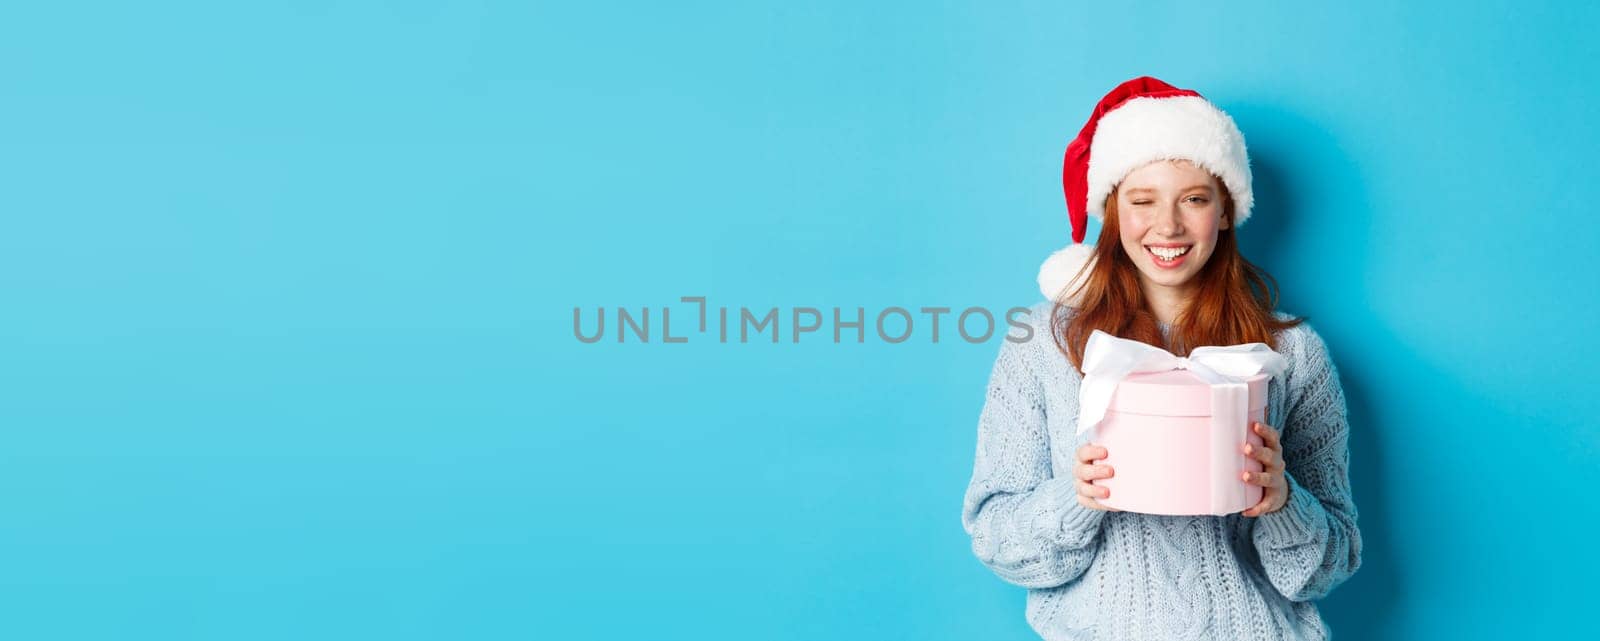 Winter holidays and Christmas Eve concept. Cute redhead girl in sweater and Santa hat, holding New Year gift and looking at camera, standing against blue background.